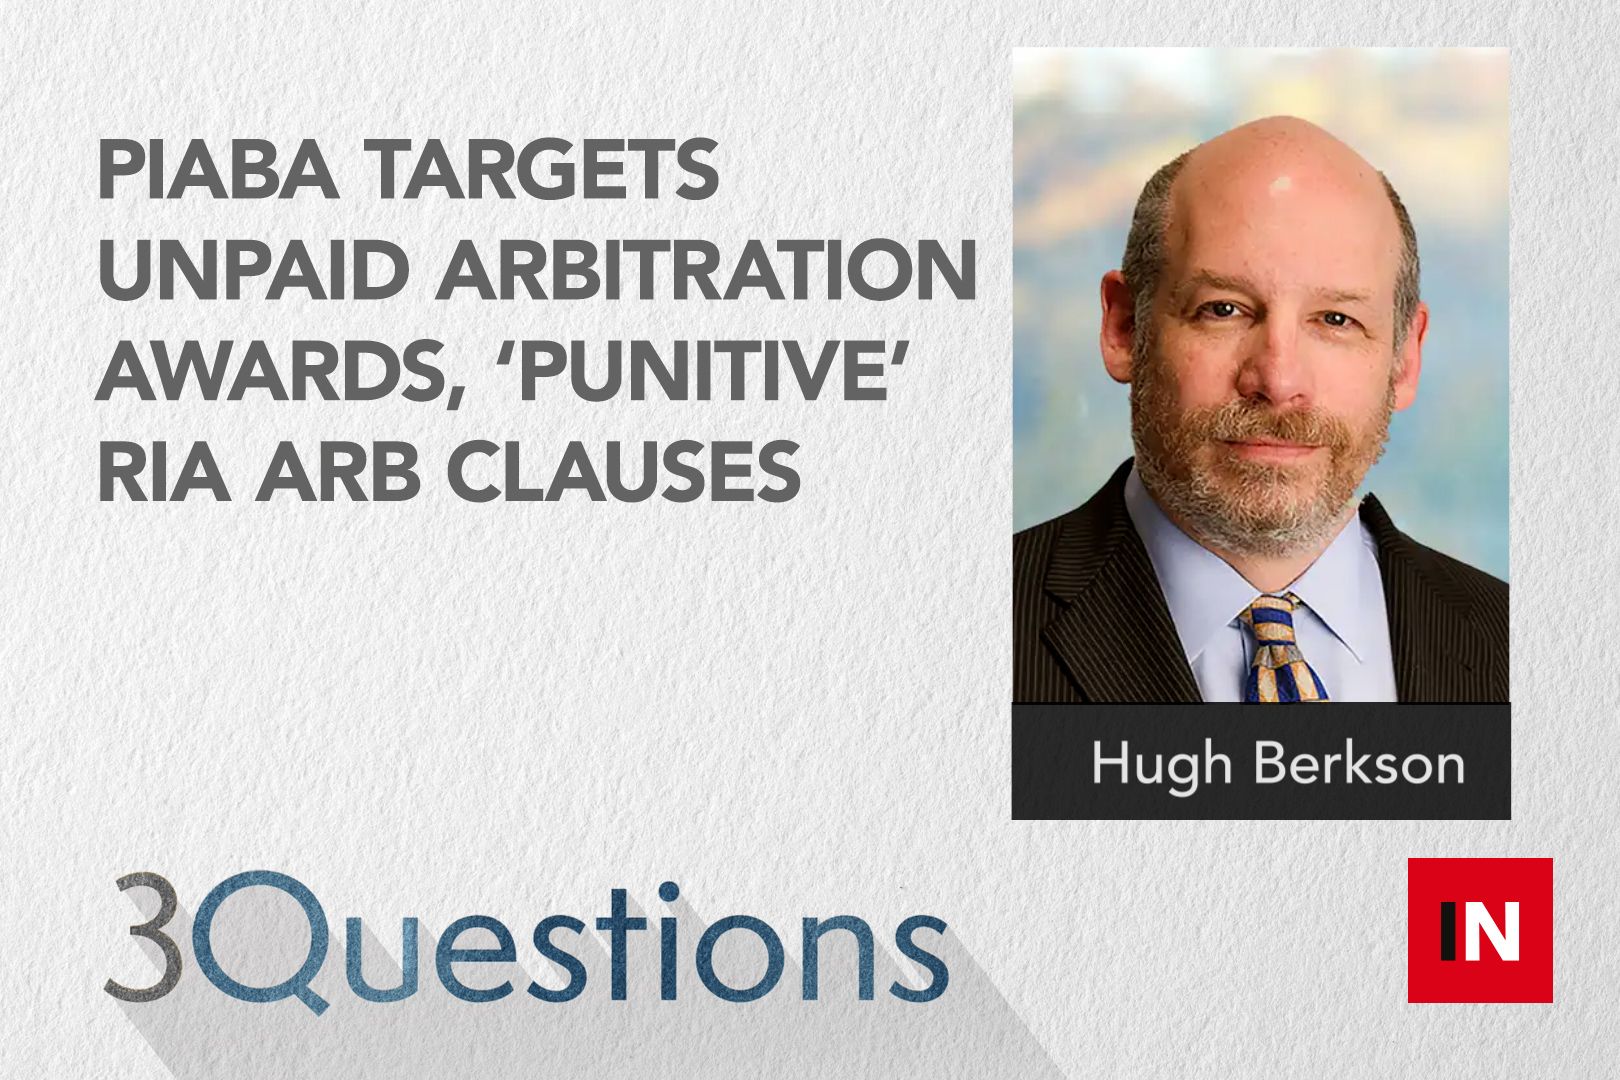 PIABA targets unpaid arbitration awards, ‘punitive’ RIA arb clauses